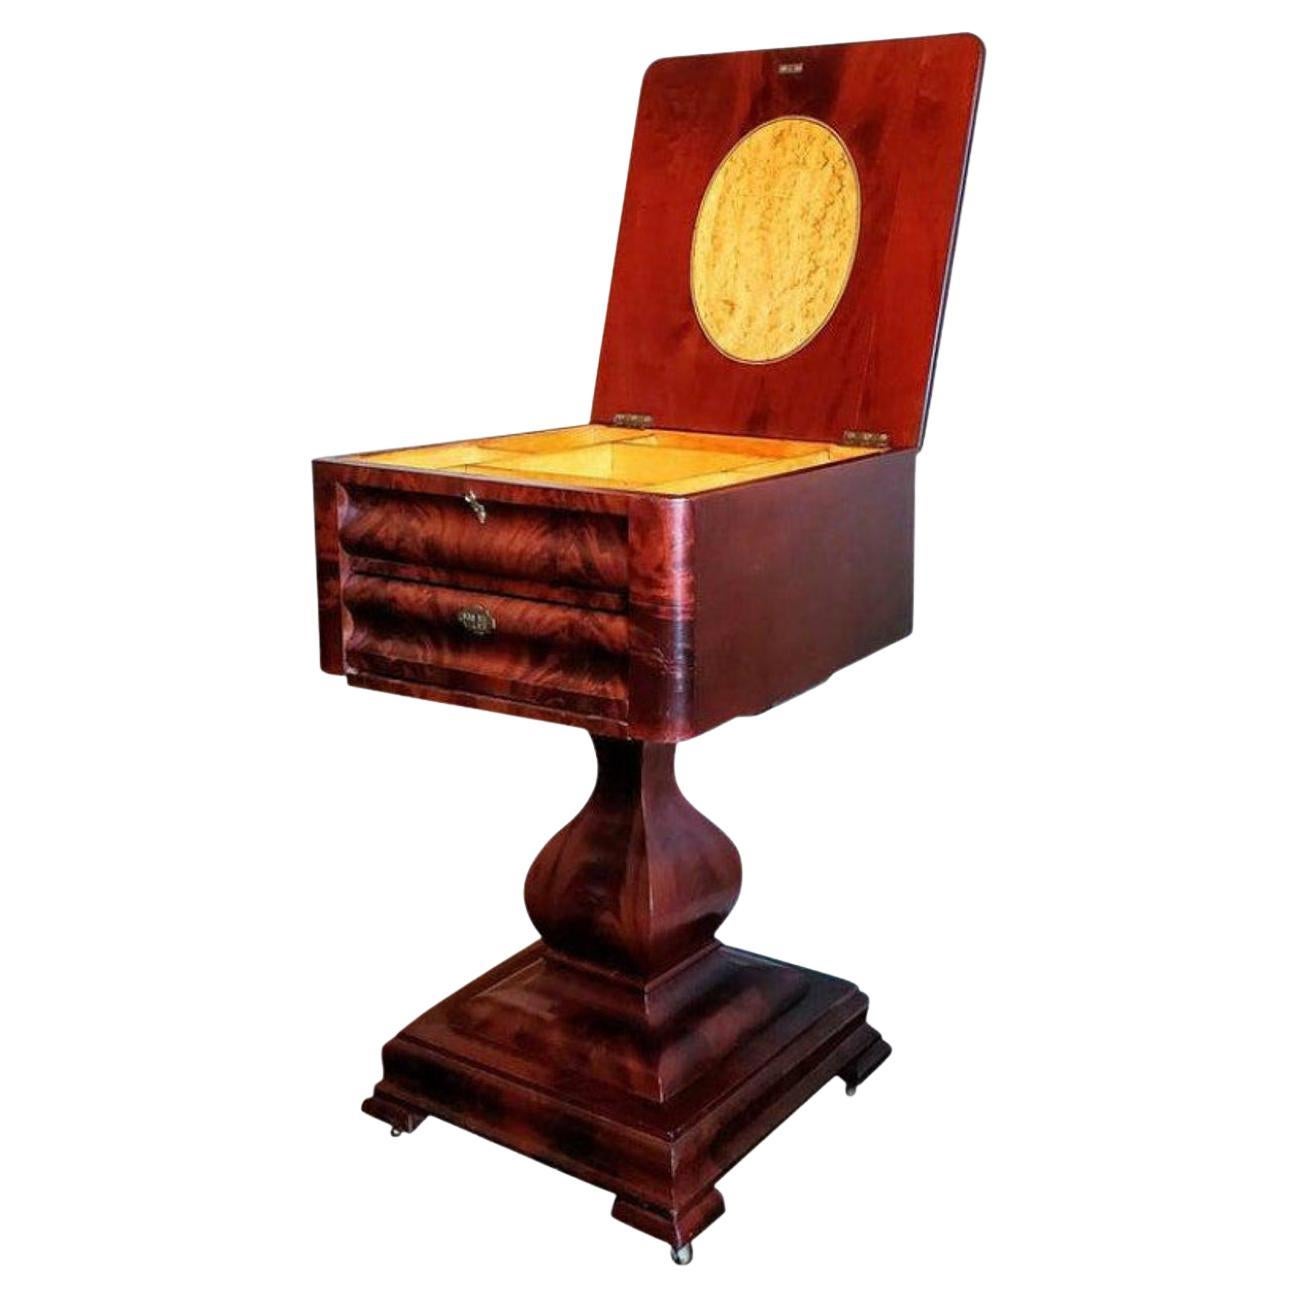 A rare fine quality Federal period American Empire flame mahogany sewing stand work table from the early 19th century.

Exquisitely hand-crafted in the northeastern United States, most likely Philadelphia, Pennsylvania, circa 1820, having a hinged